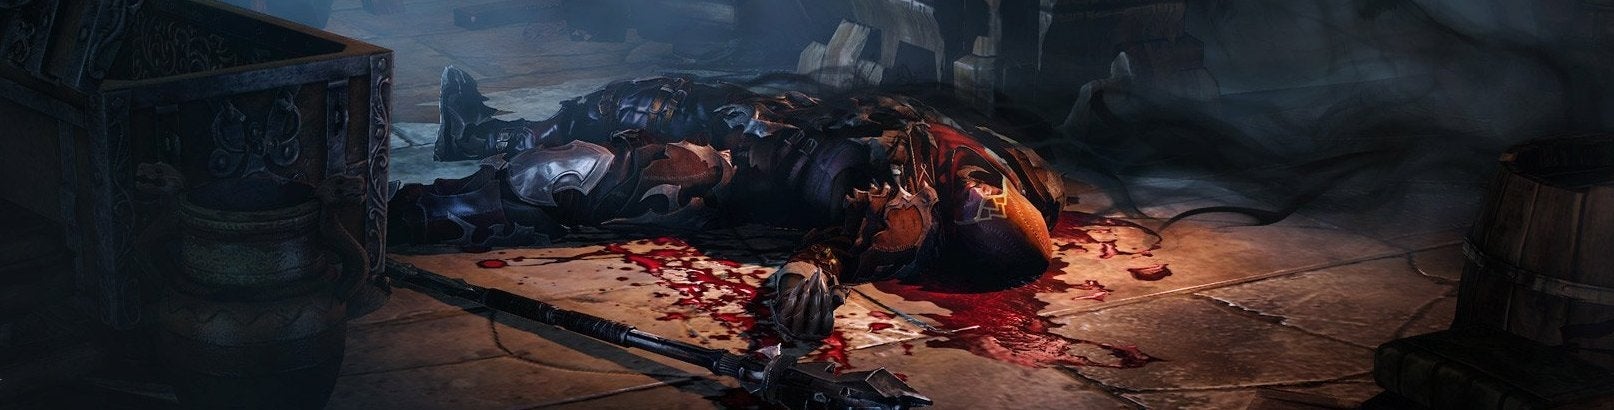 Image for Lords of the Fallen: Don't you call it Dark Souls